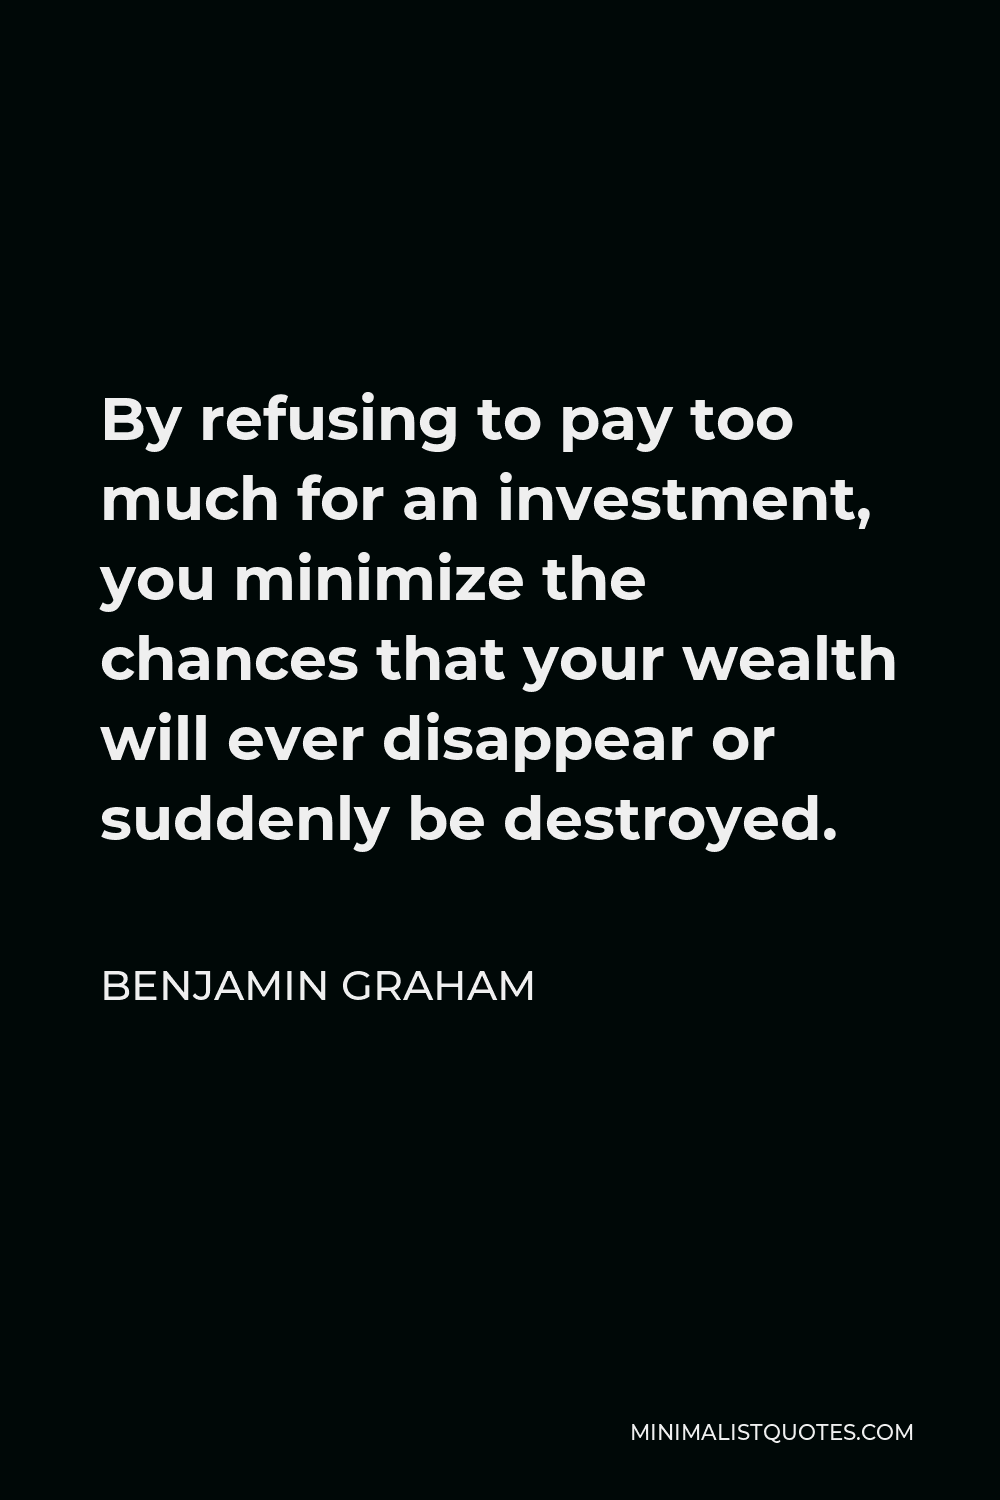 Benjamin Graham Quote - By refusing to pay too much for an investment, you minimize the chances that your wealth will ever disappear or suddenly be destroyed.